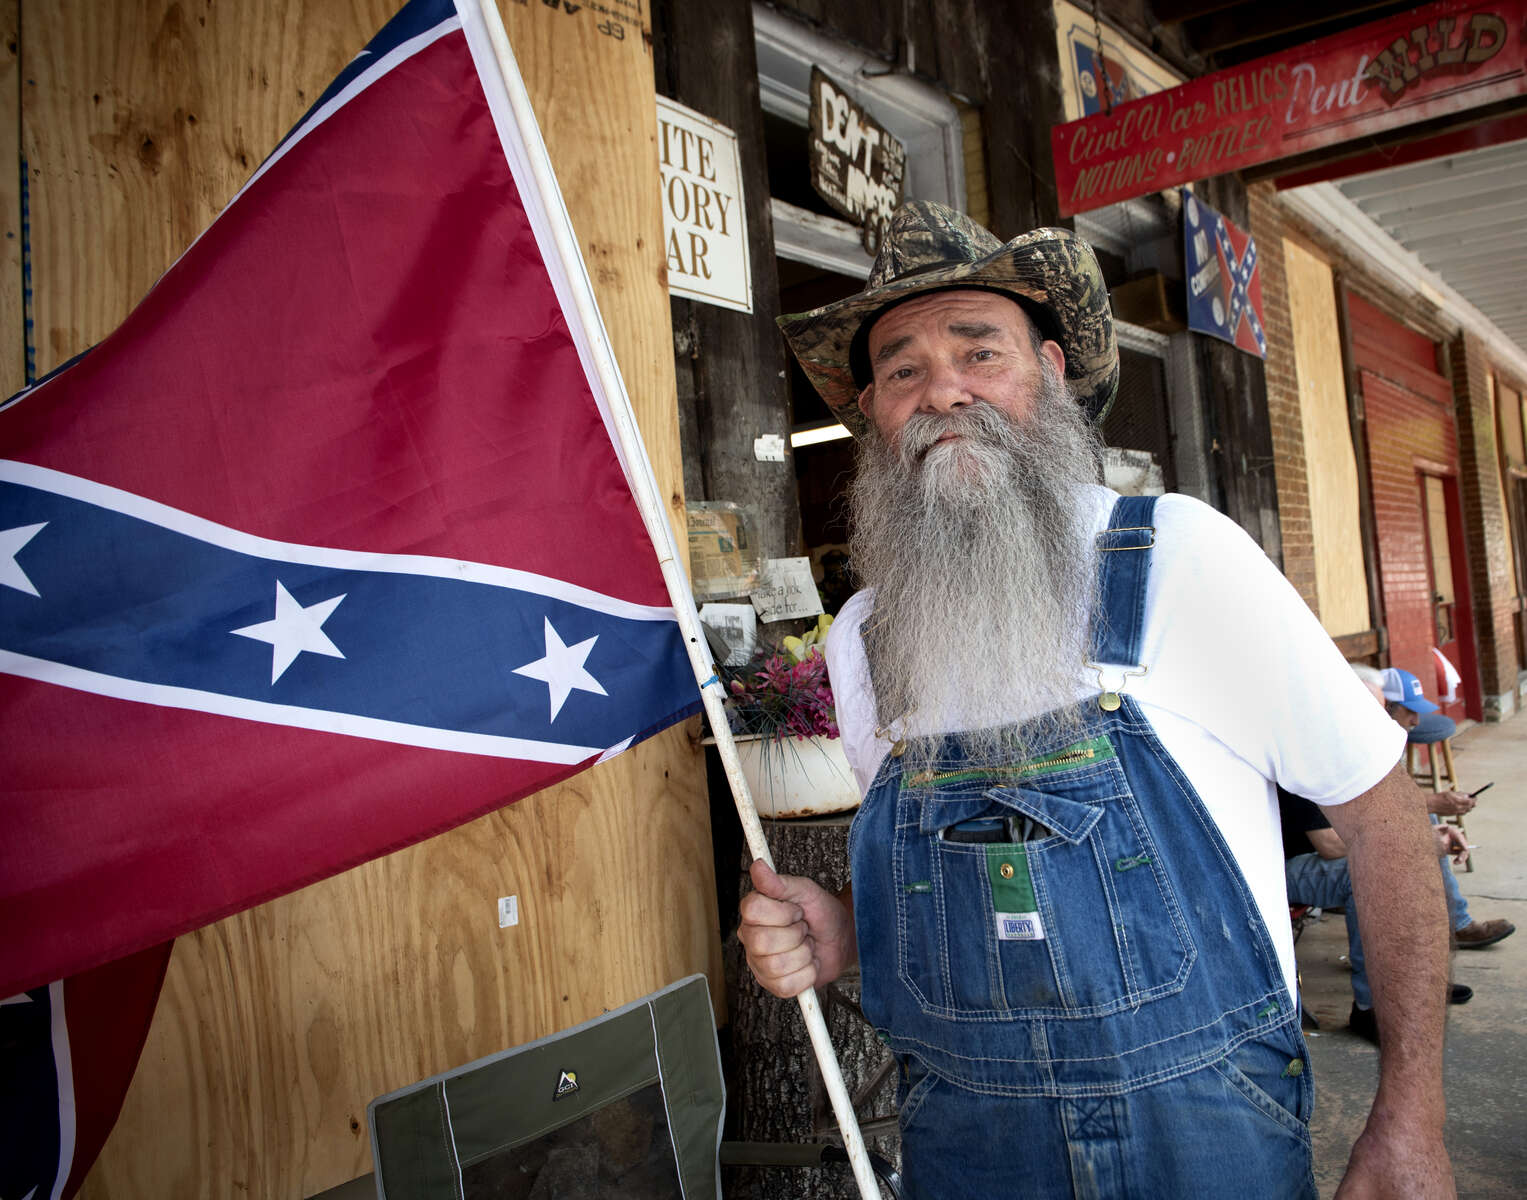 LAMARR MAYES, 64, from Fairmount, GA, holds his personal Confederate Battle Flag replica outside Dent Myers’ Civil War Surplus store, where regular visitors often meet to share their views on society with others who appreciate ways of the ‘Old South.’